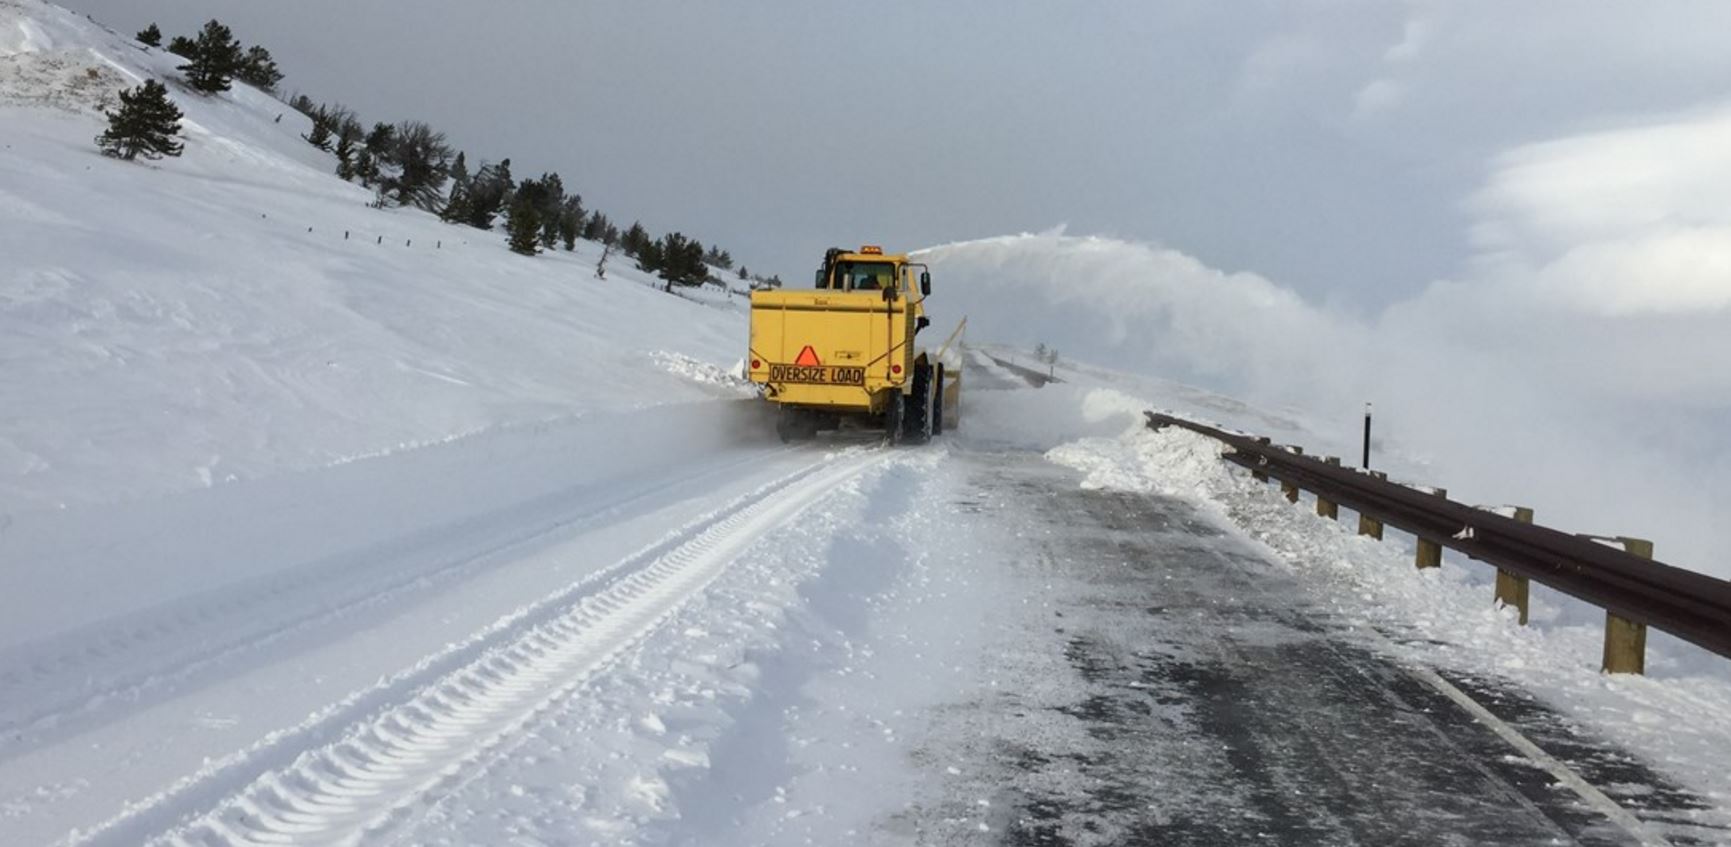 WYDOT working to reopen Wyoming highways. Credit: Wyoming Department of Transportation